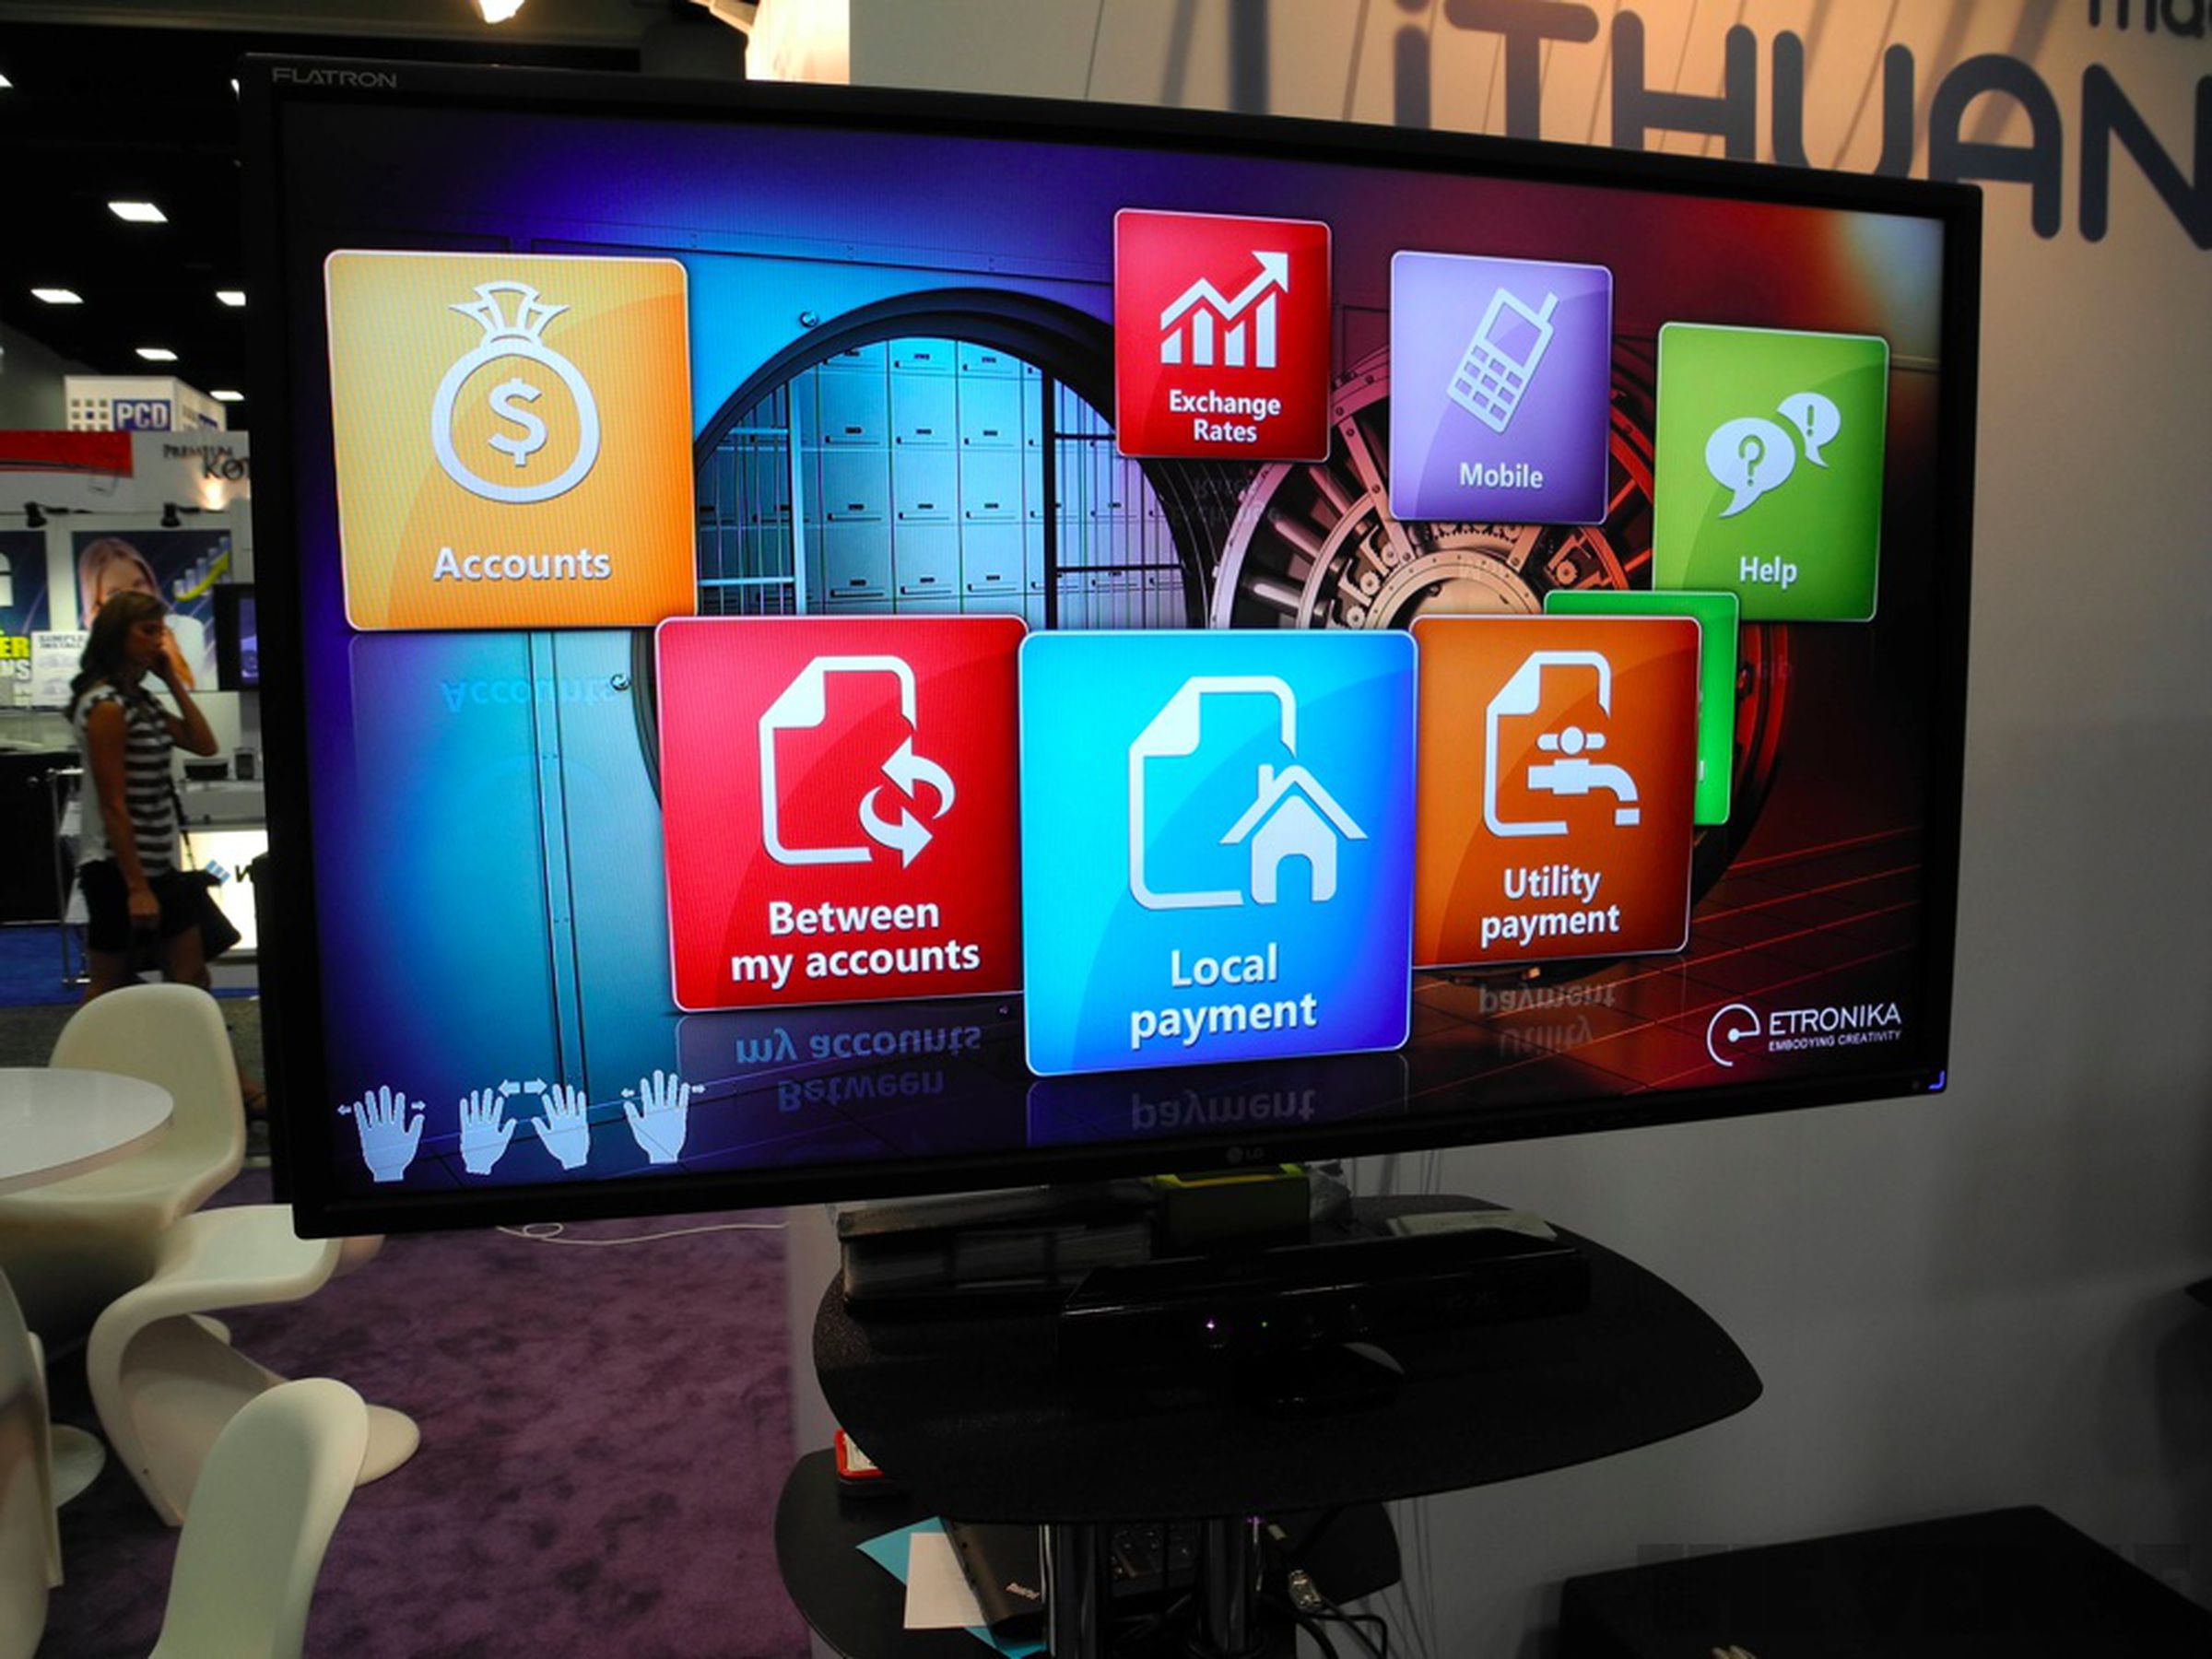 Etronika Kinect-based online banking interface hands-on